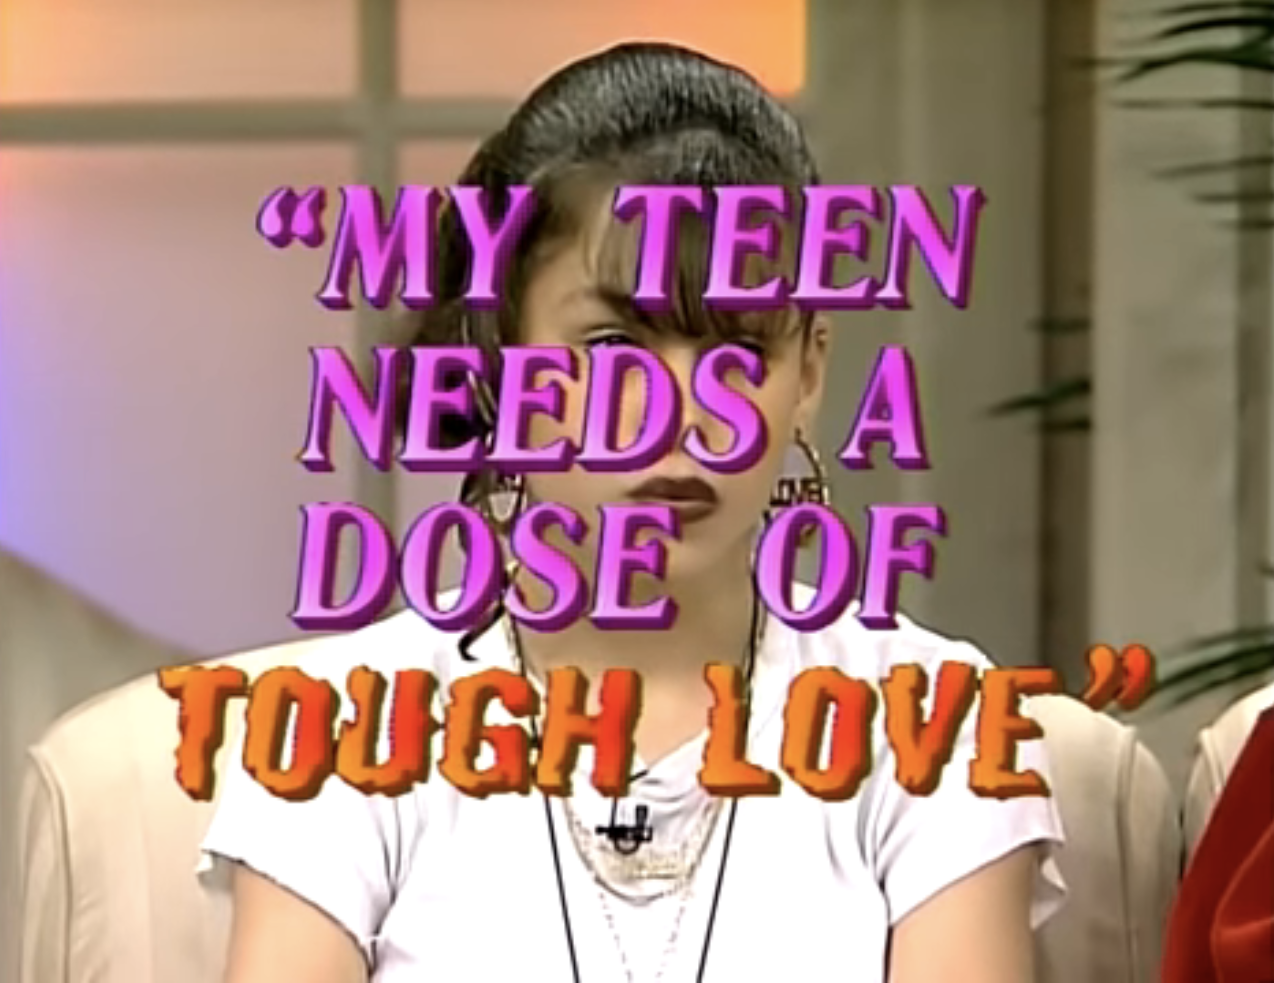 &quot;My Teen Needs a Dose of Tough Love&quot;